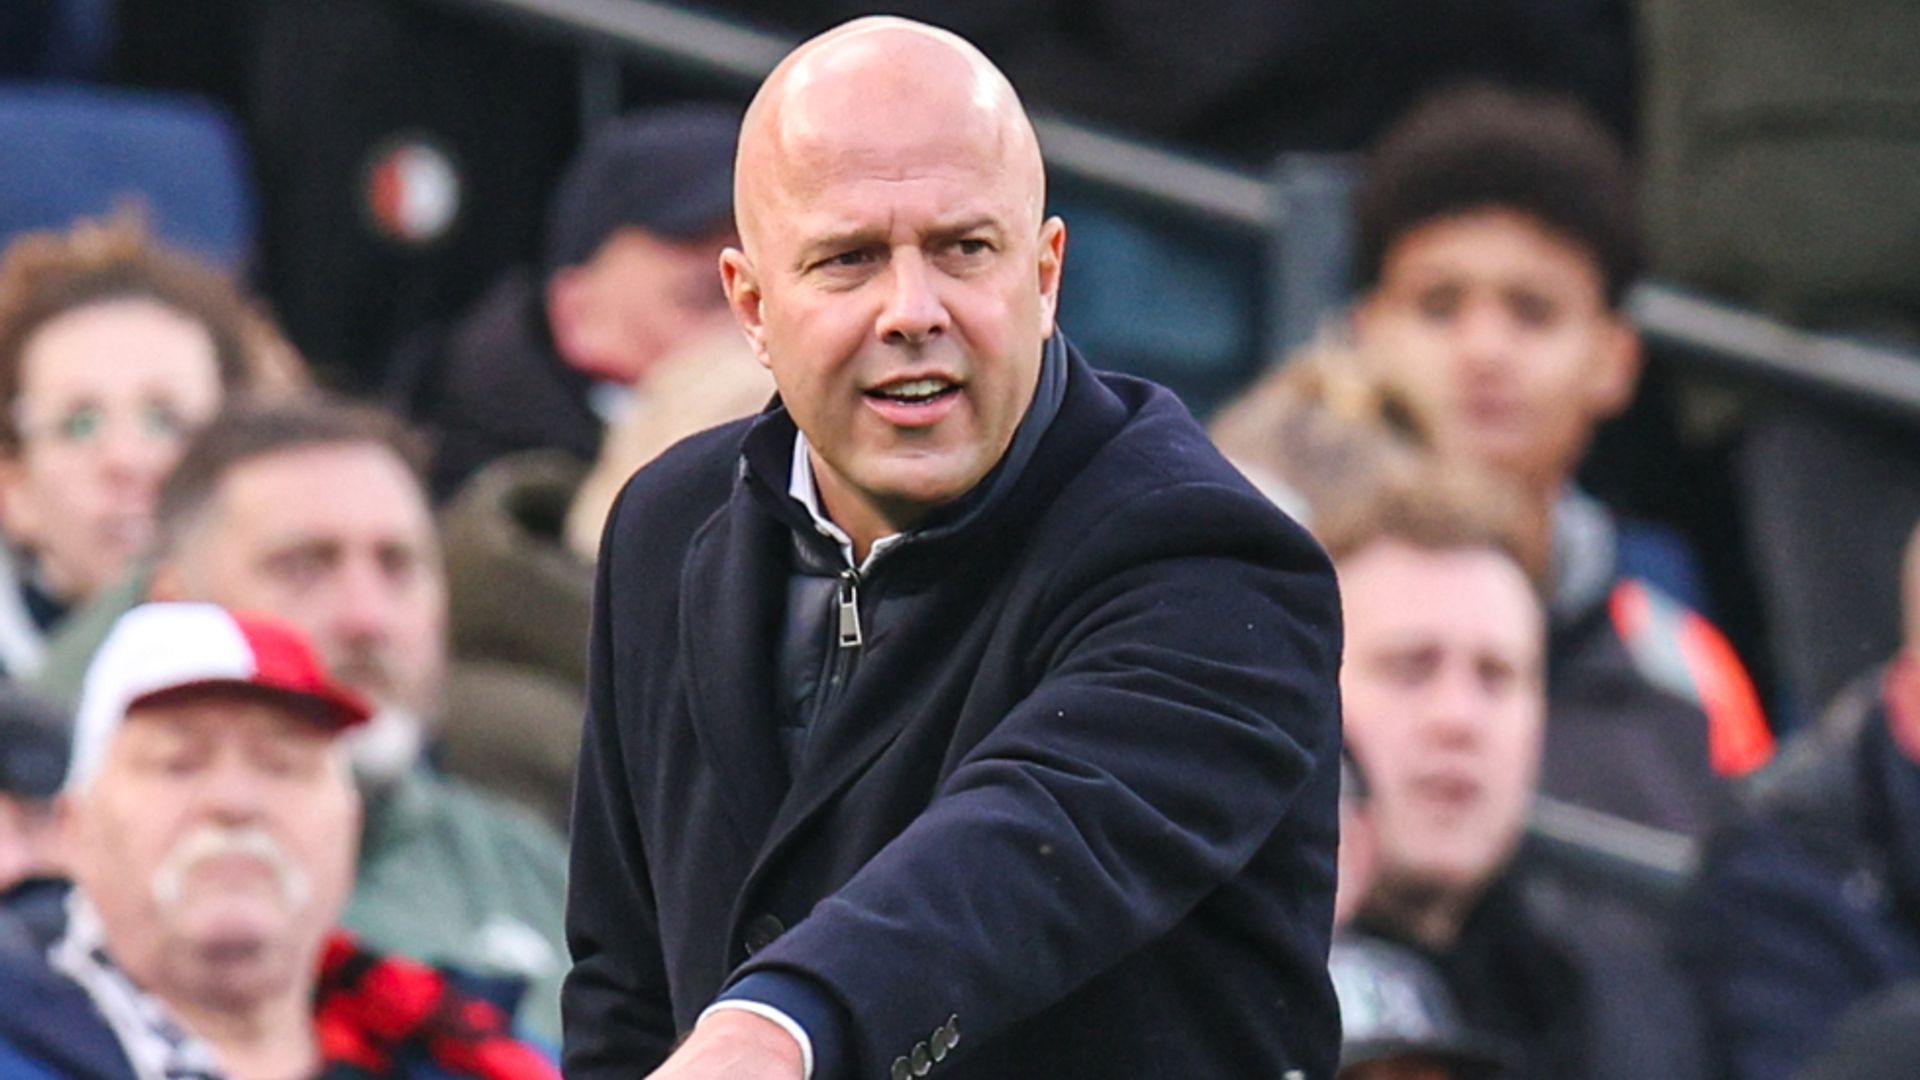 Feyenoord boss Slot turns down Leeds: 'It was a compliment they were interested'